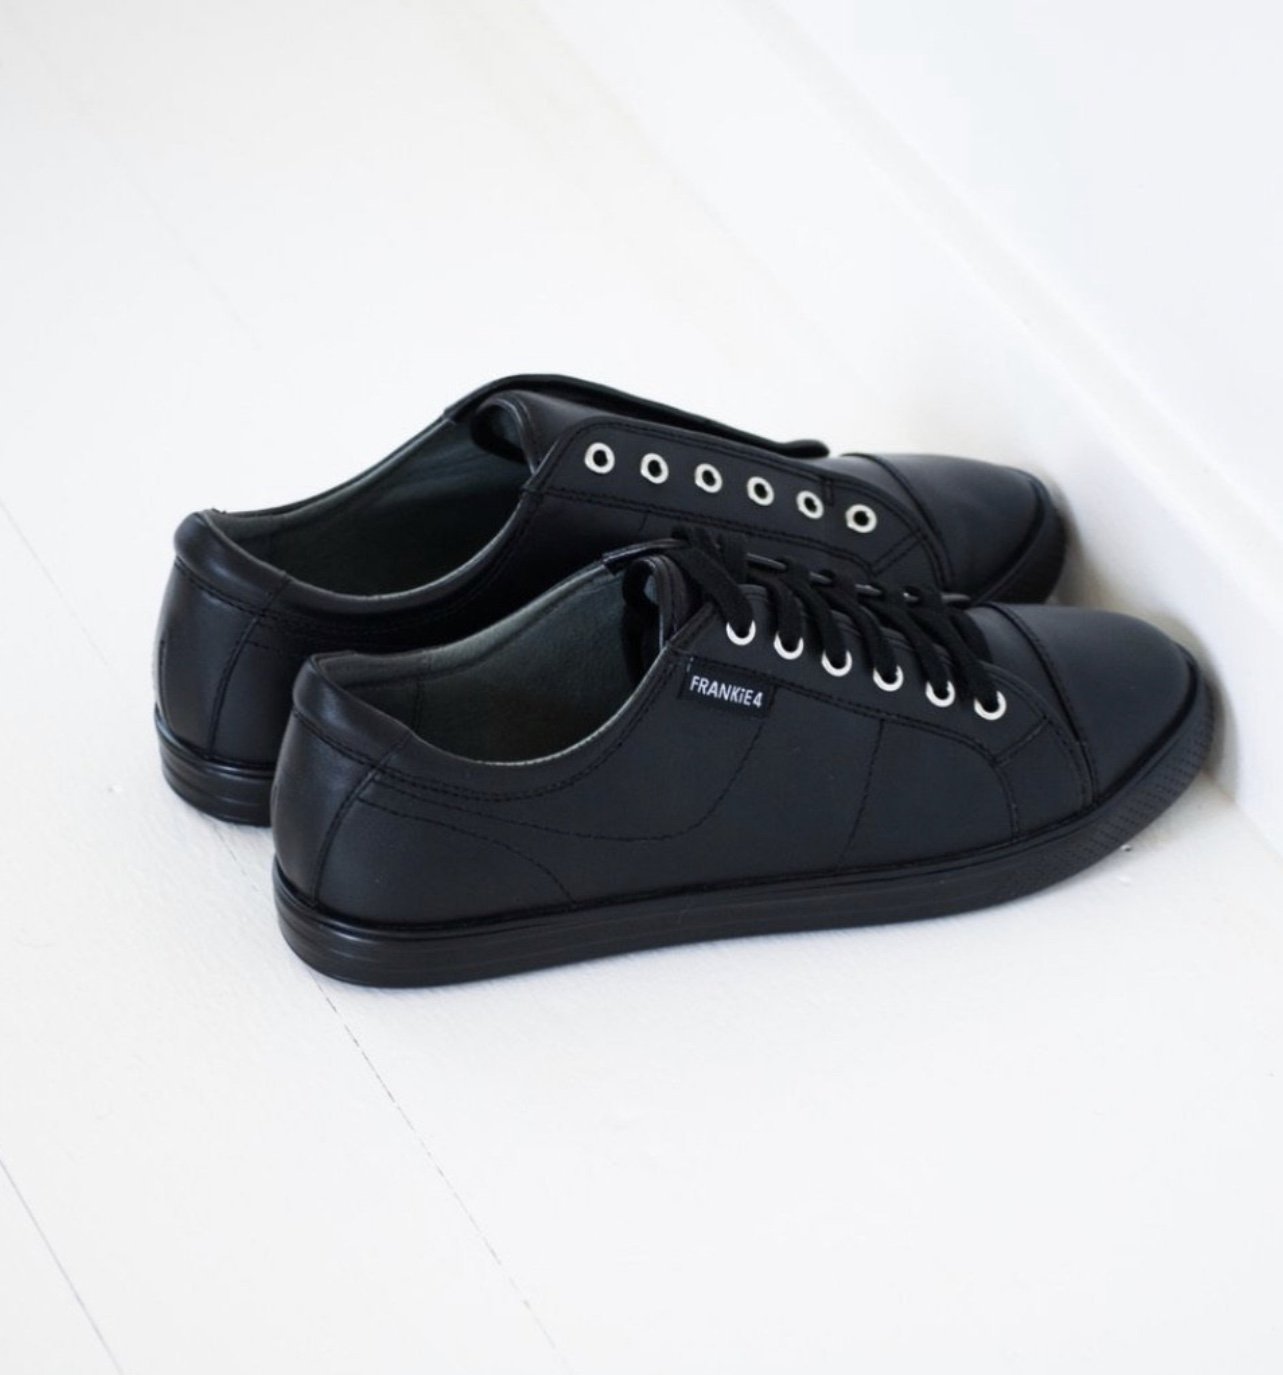 Frankie 4 Black lace up leather sneaker 